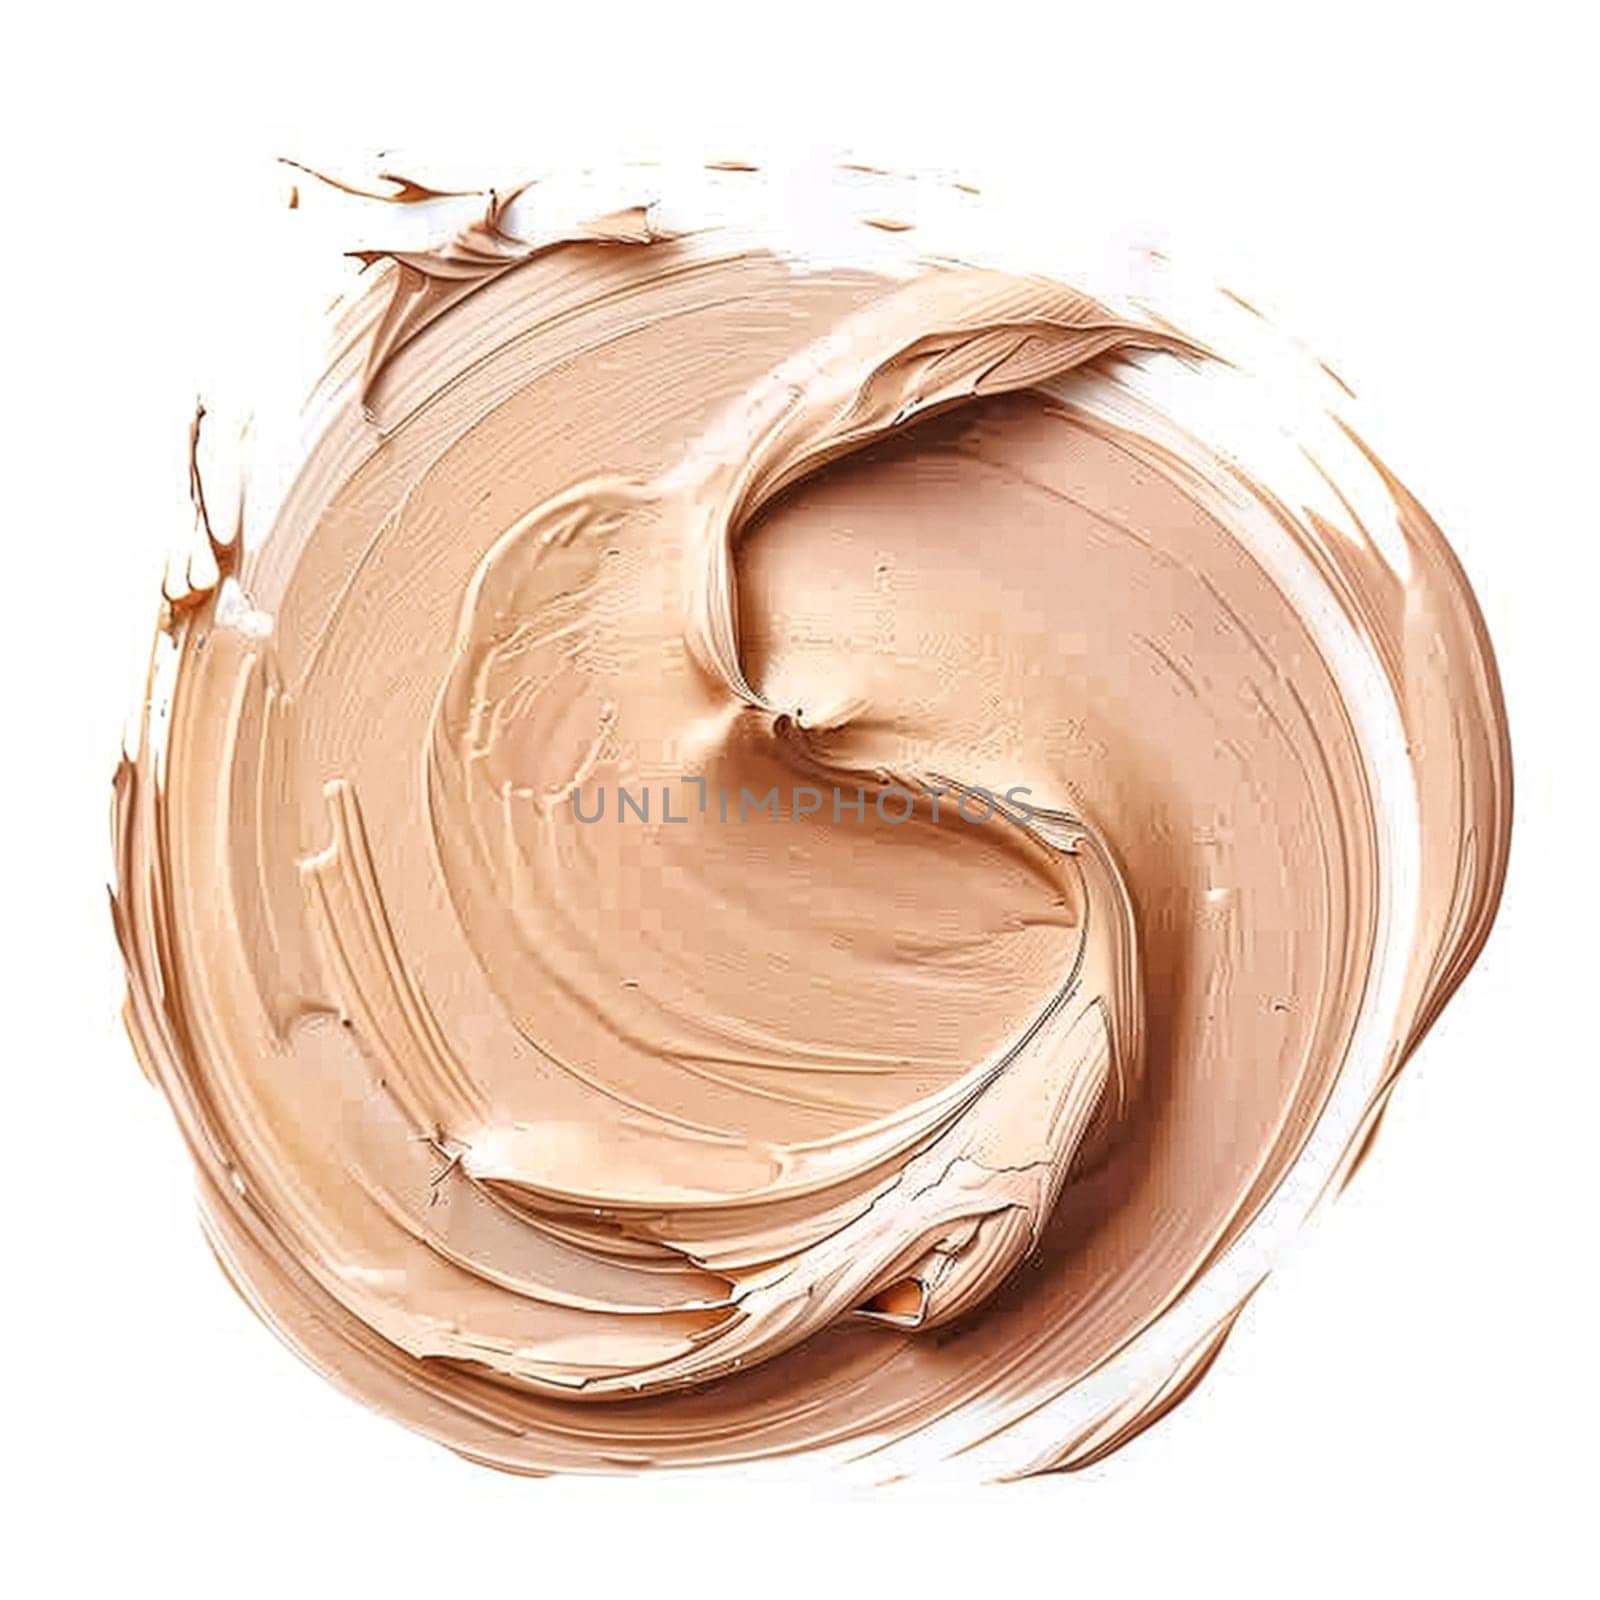 Make-up foundation texture as circle shape design, beauty product and cosmetics, makeup blush eyeshadow powder as abstract luxury cosmetic background by Anneleven